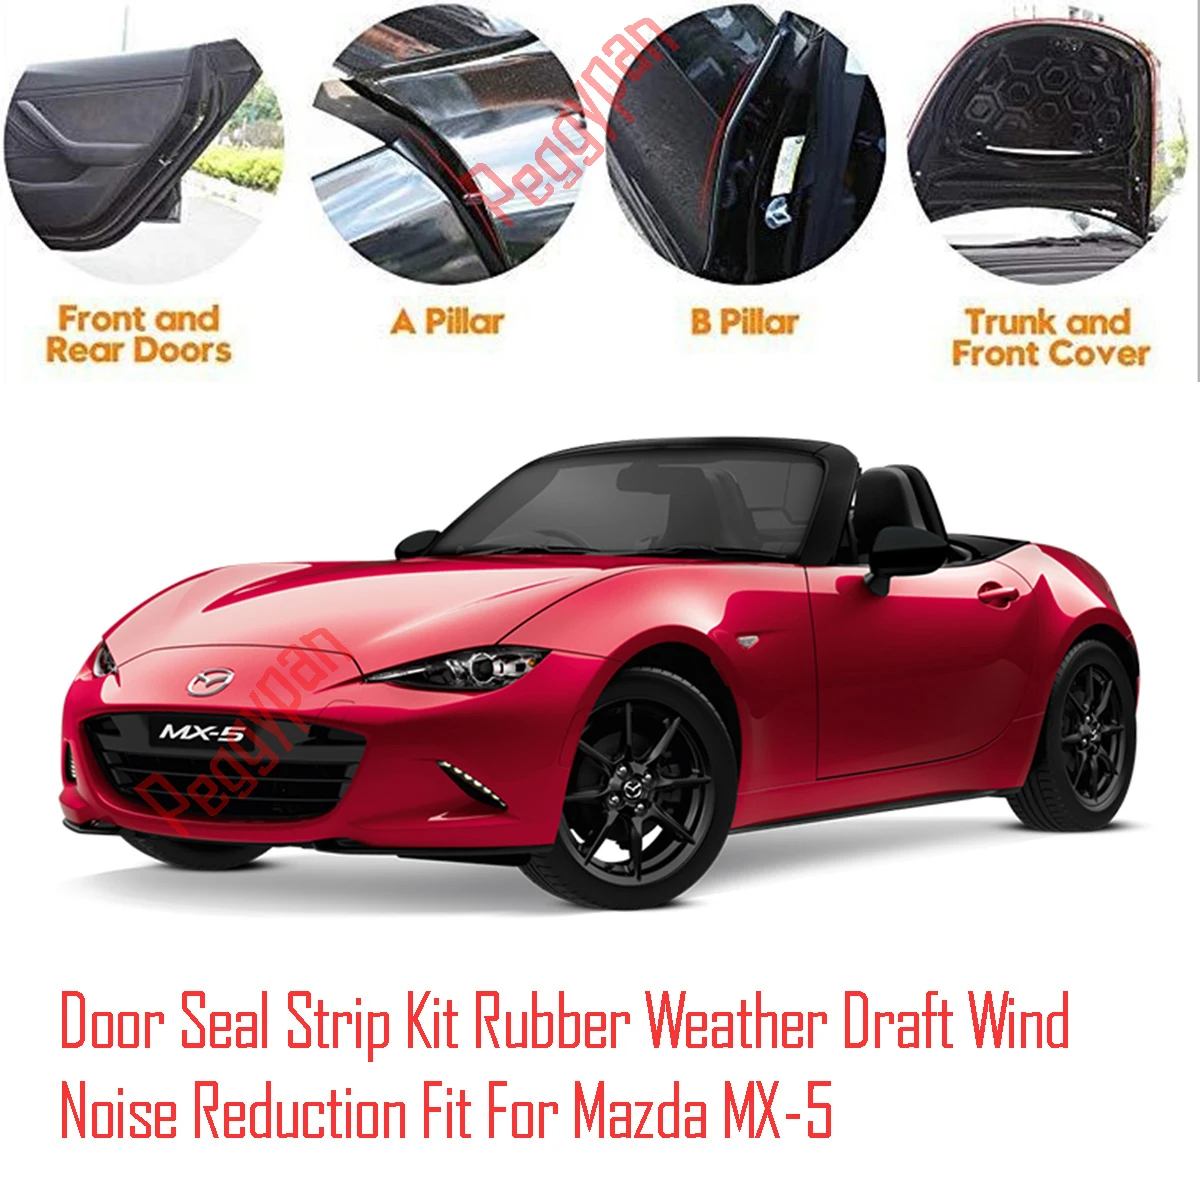 Door Seal Strip Kit Self Adhesive Window Engine Cover Soundproof Rubber Weather Draft Wind Noise Reduction Fit For Mazda MX-5